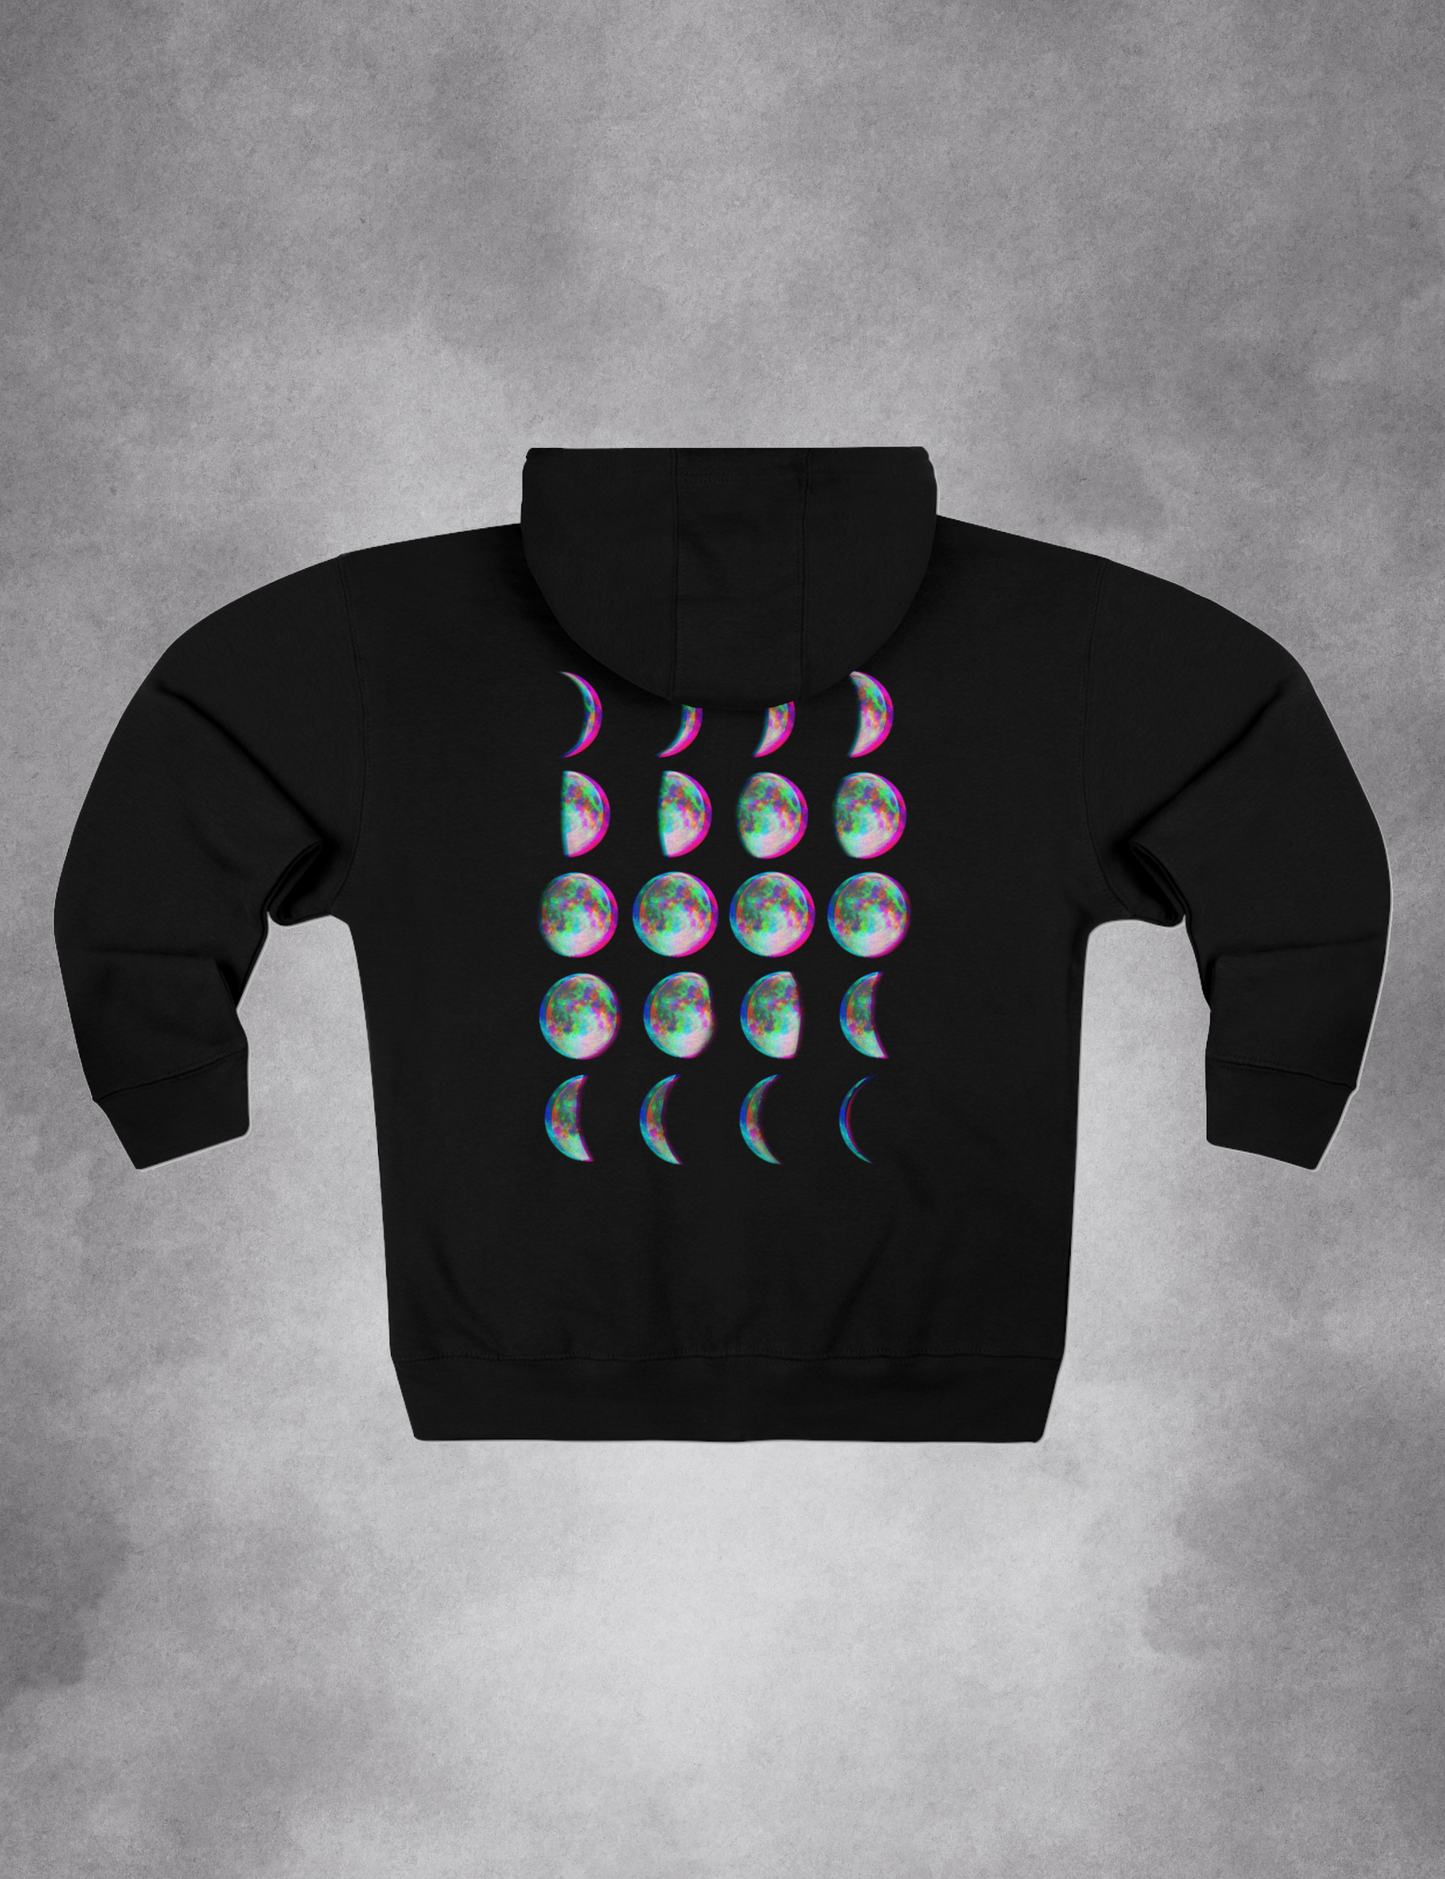 Edgy Goth Witchy Glitch Moon Phase Plus Size Zip Up Hoodie